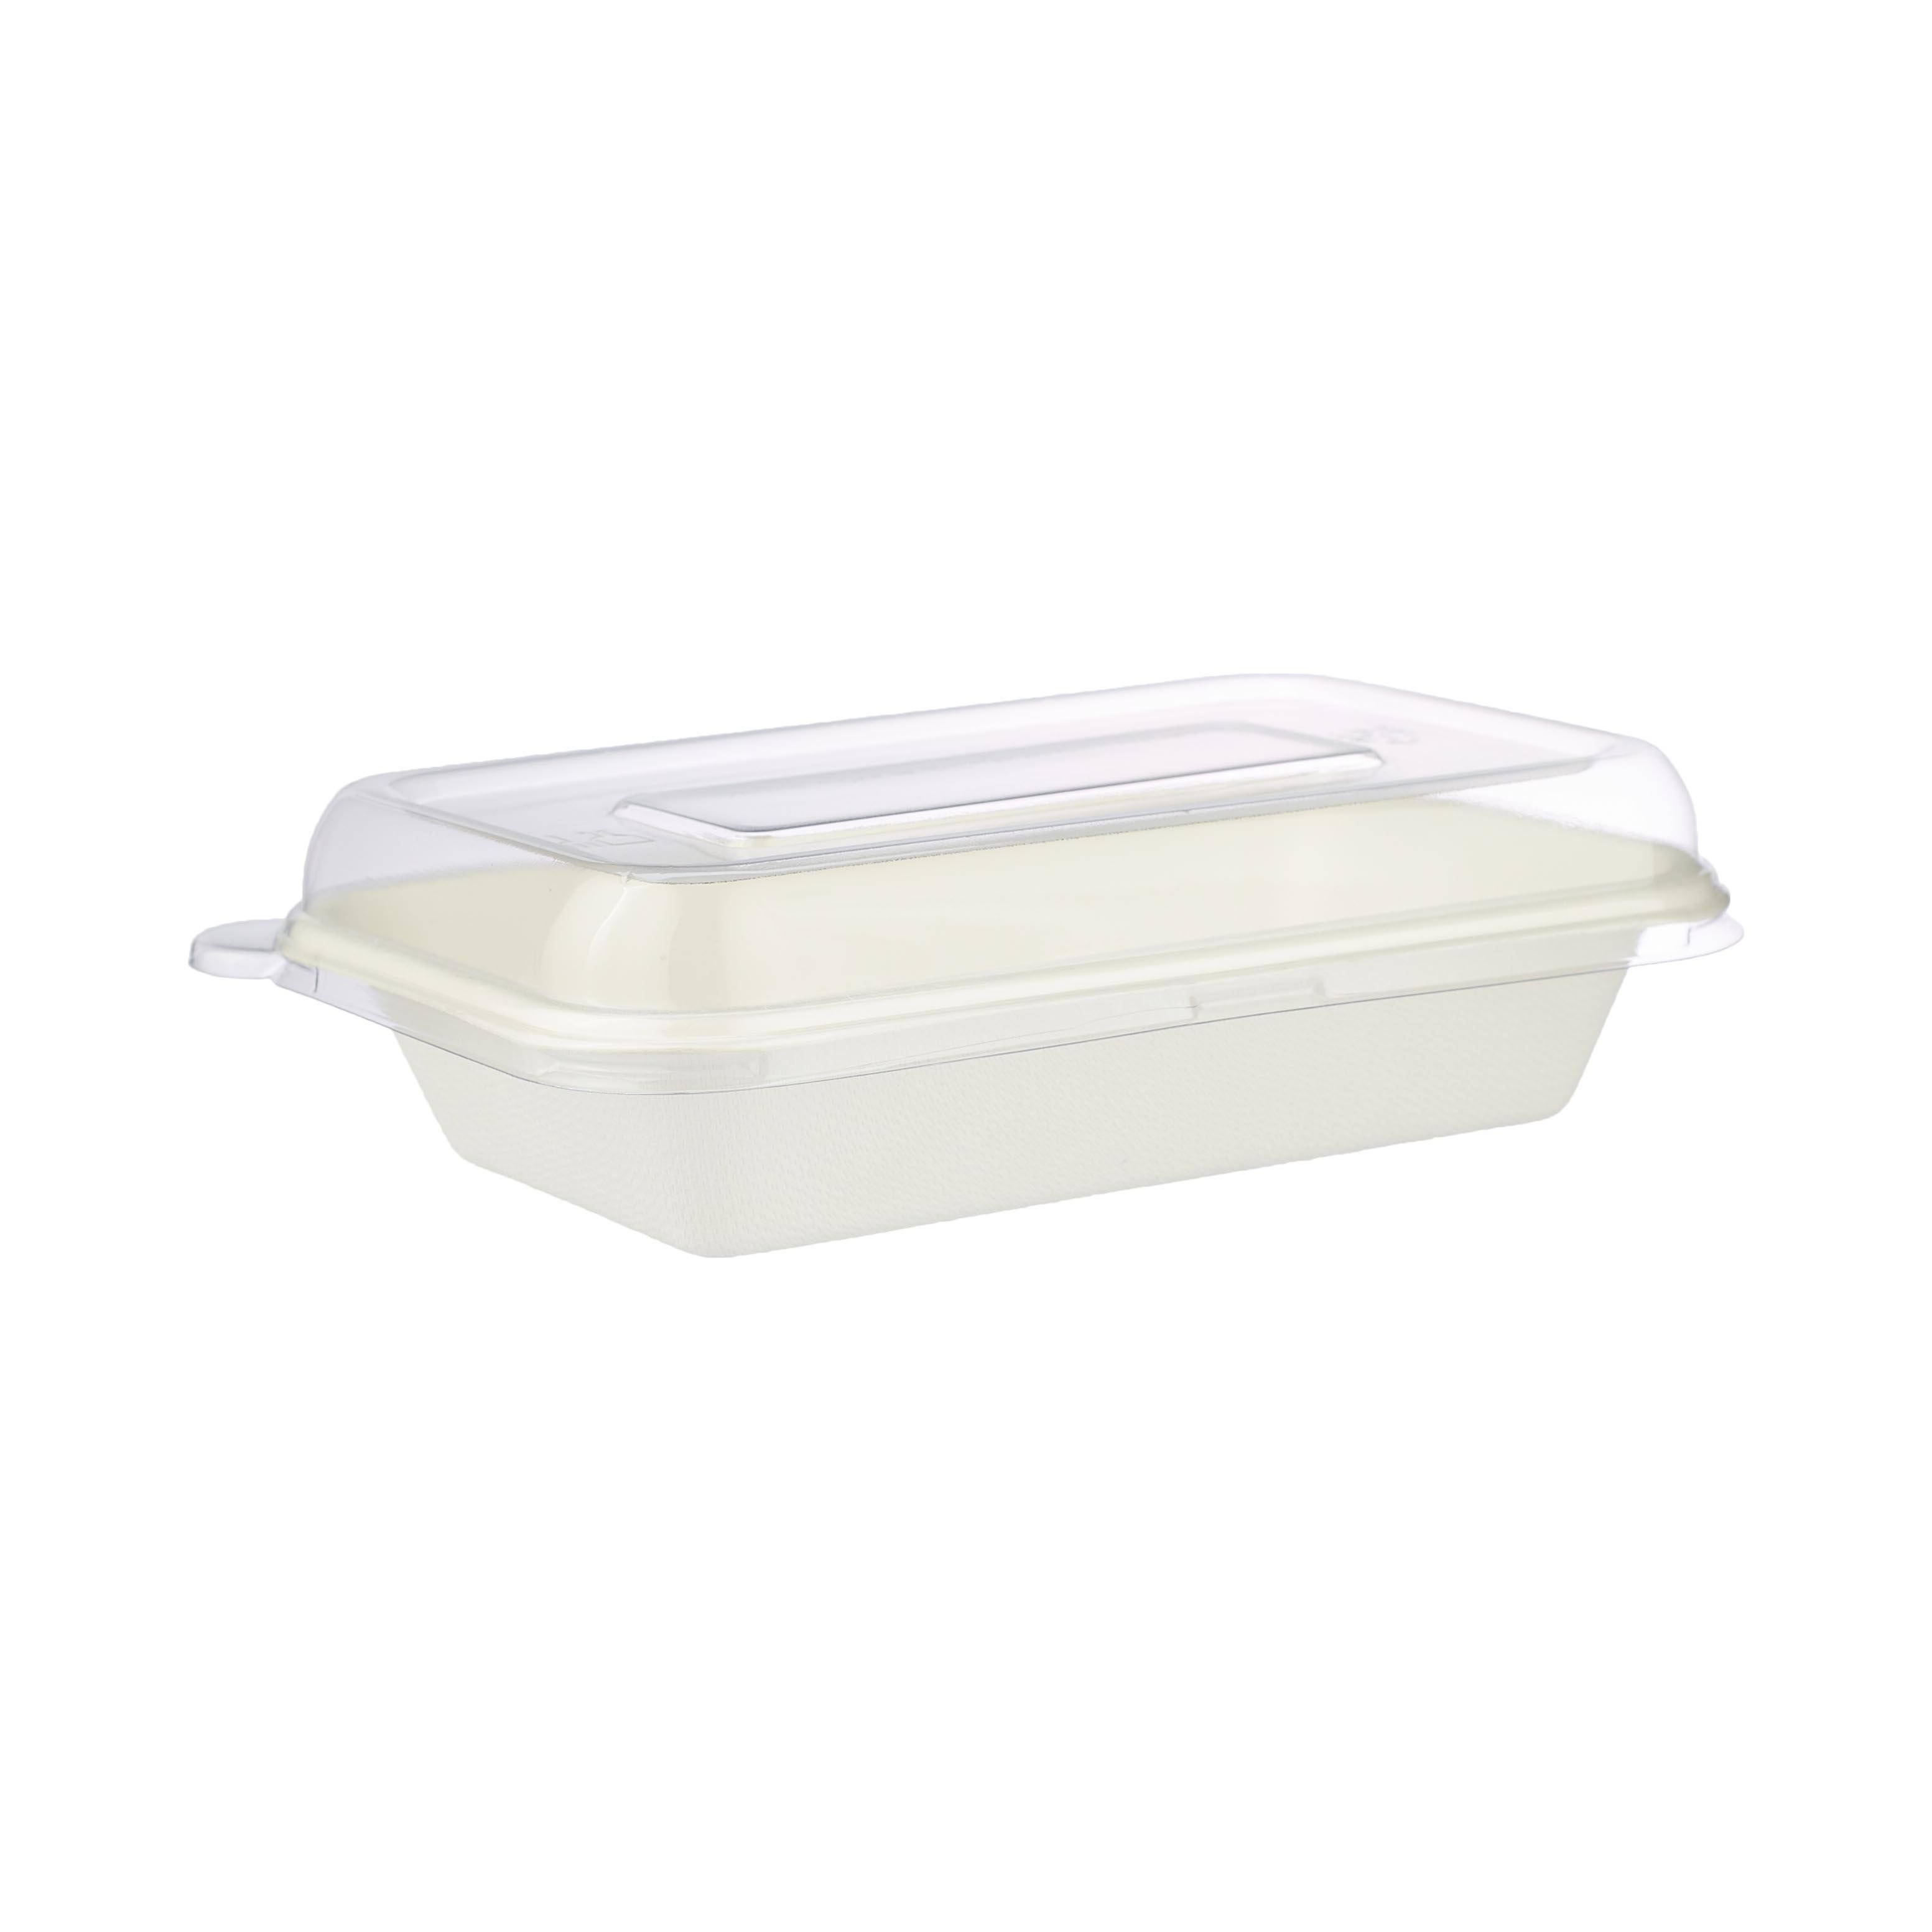 Hotpack Clear Bio-Degradable 12/16 Oz Multi-Purpose Container Lid Only